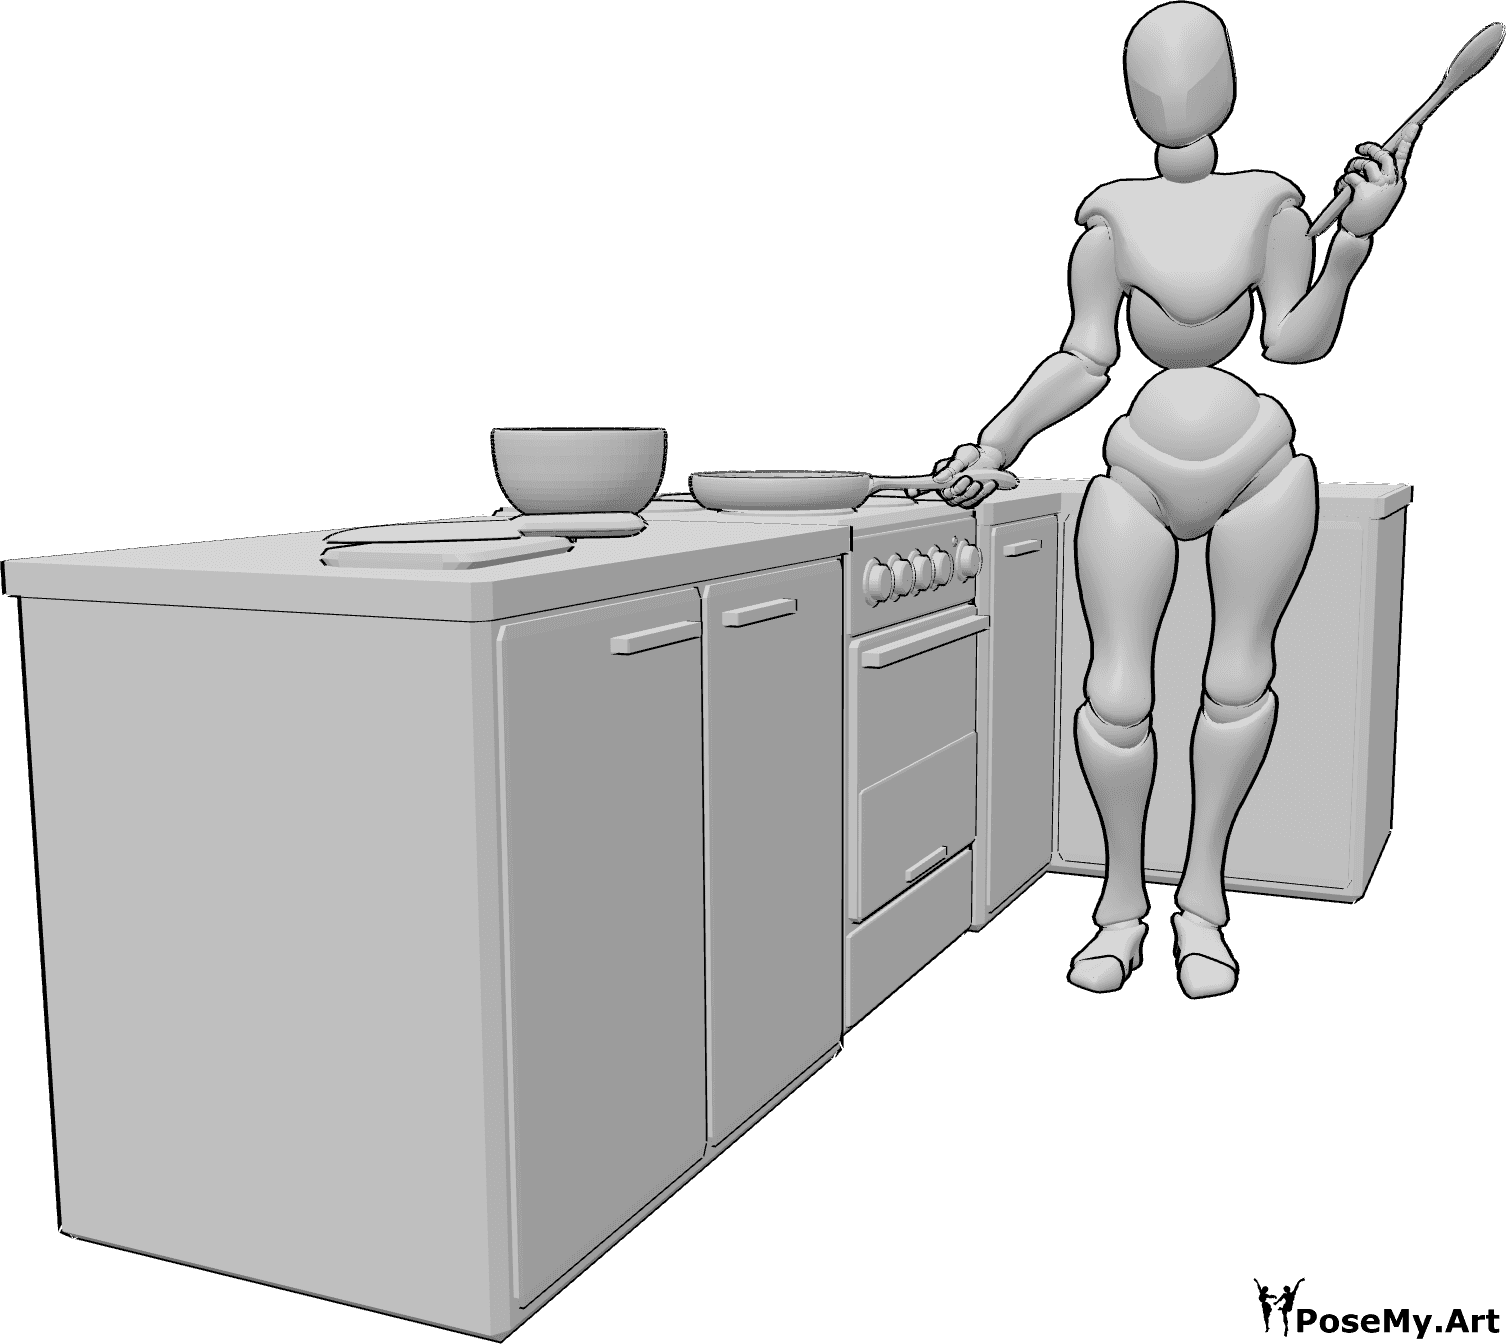 Pose Reference- Cooking holding spoon pose - Female is standing in the kitchen, holding a pan in her right hand and a wooden spoon in her left hand